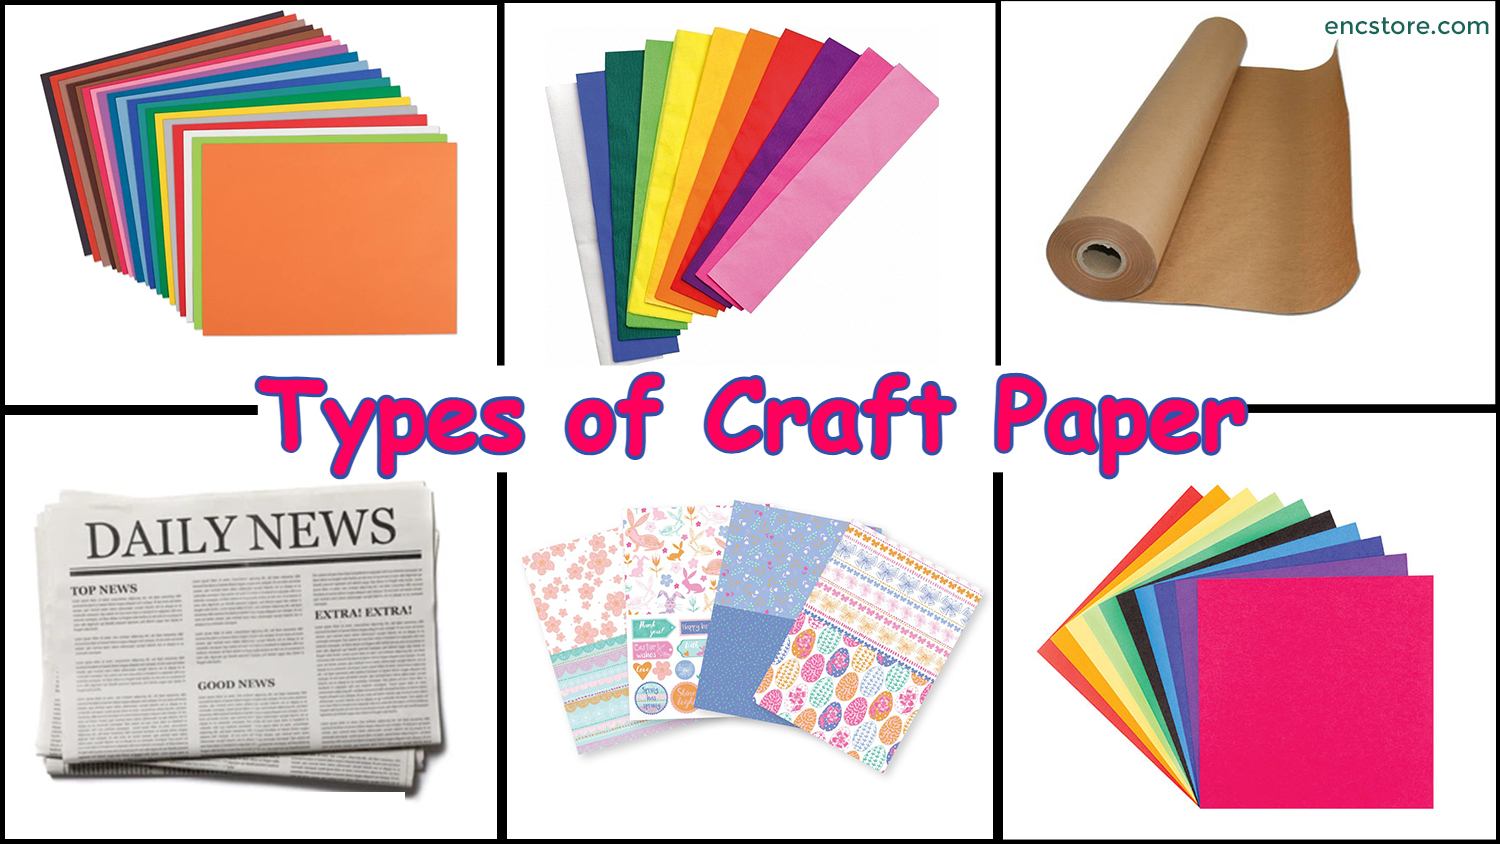 Types of Craft Paper